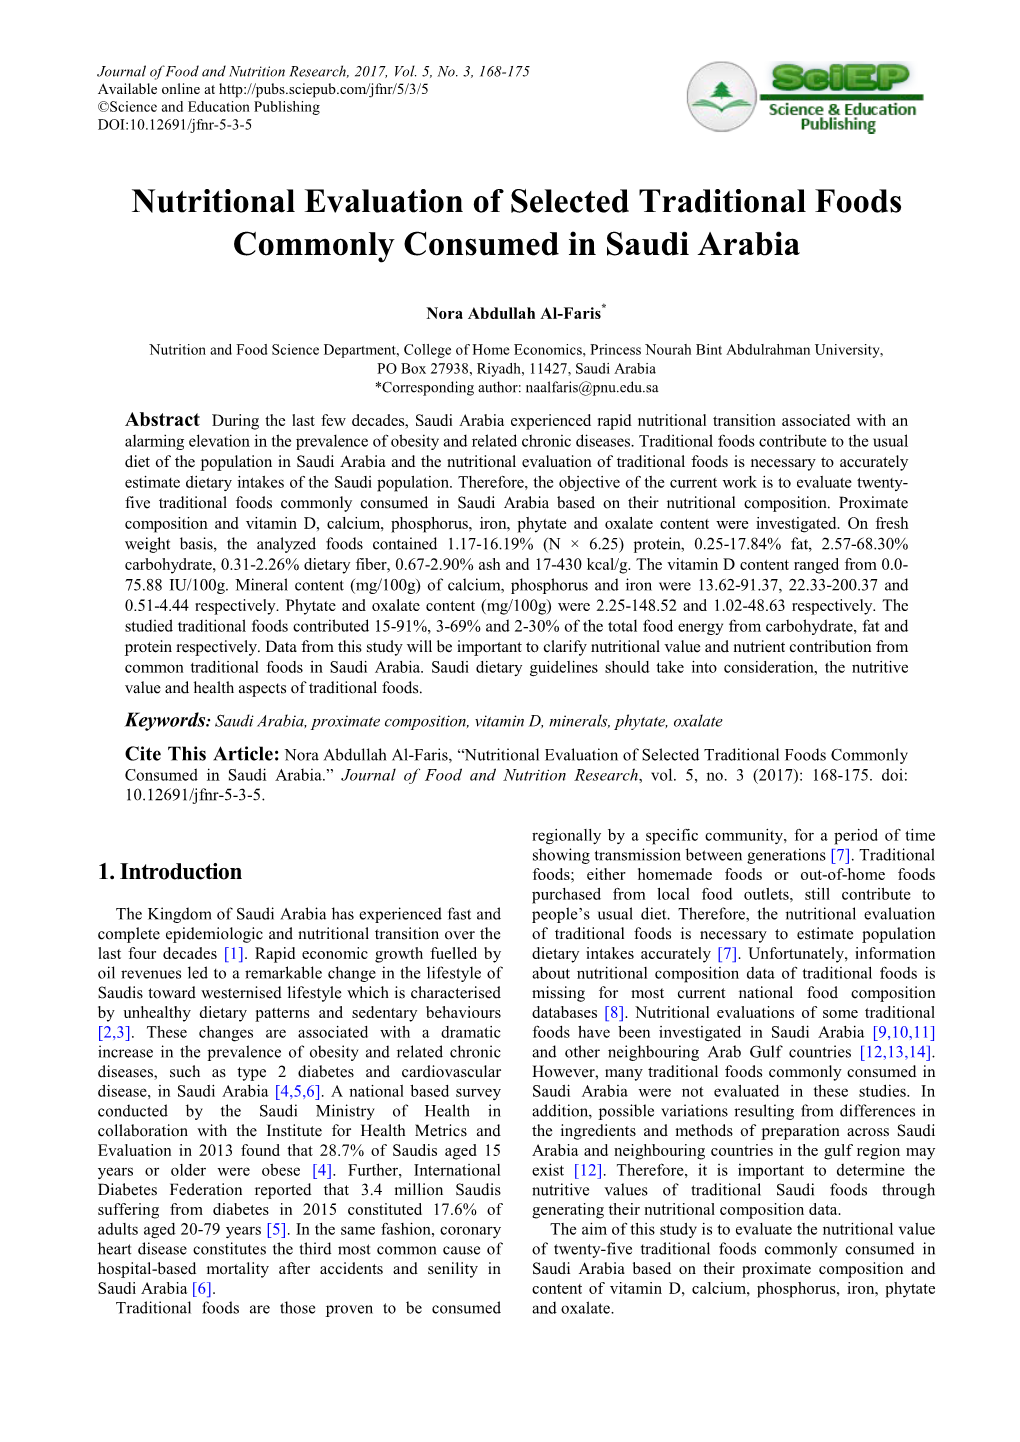 Nutritional Evaluation of Selected Traditional Foods Commonly Consumed in Saudi Arabia